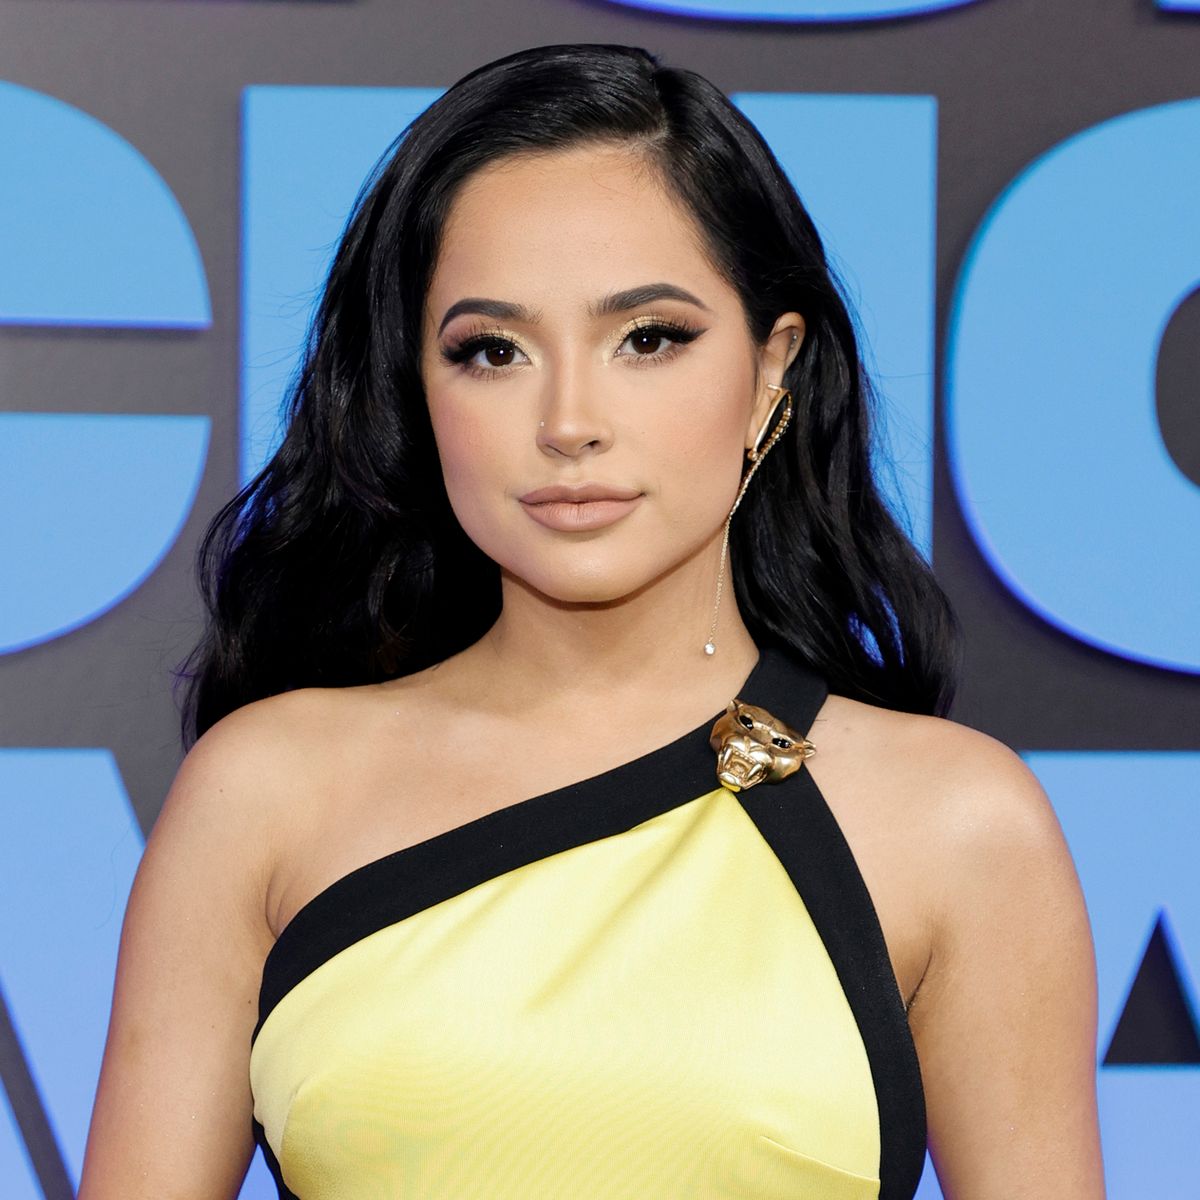 Did Becky G Undergo Nose Job Or Not?